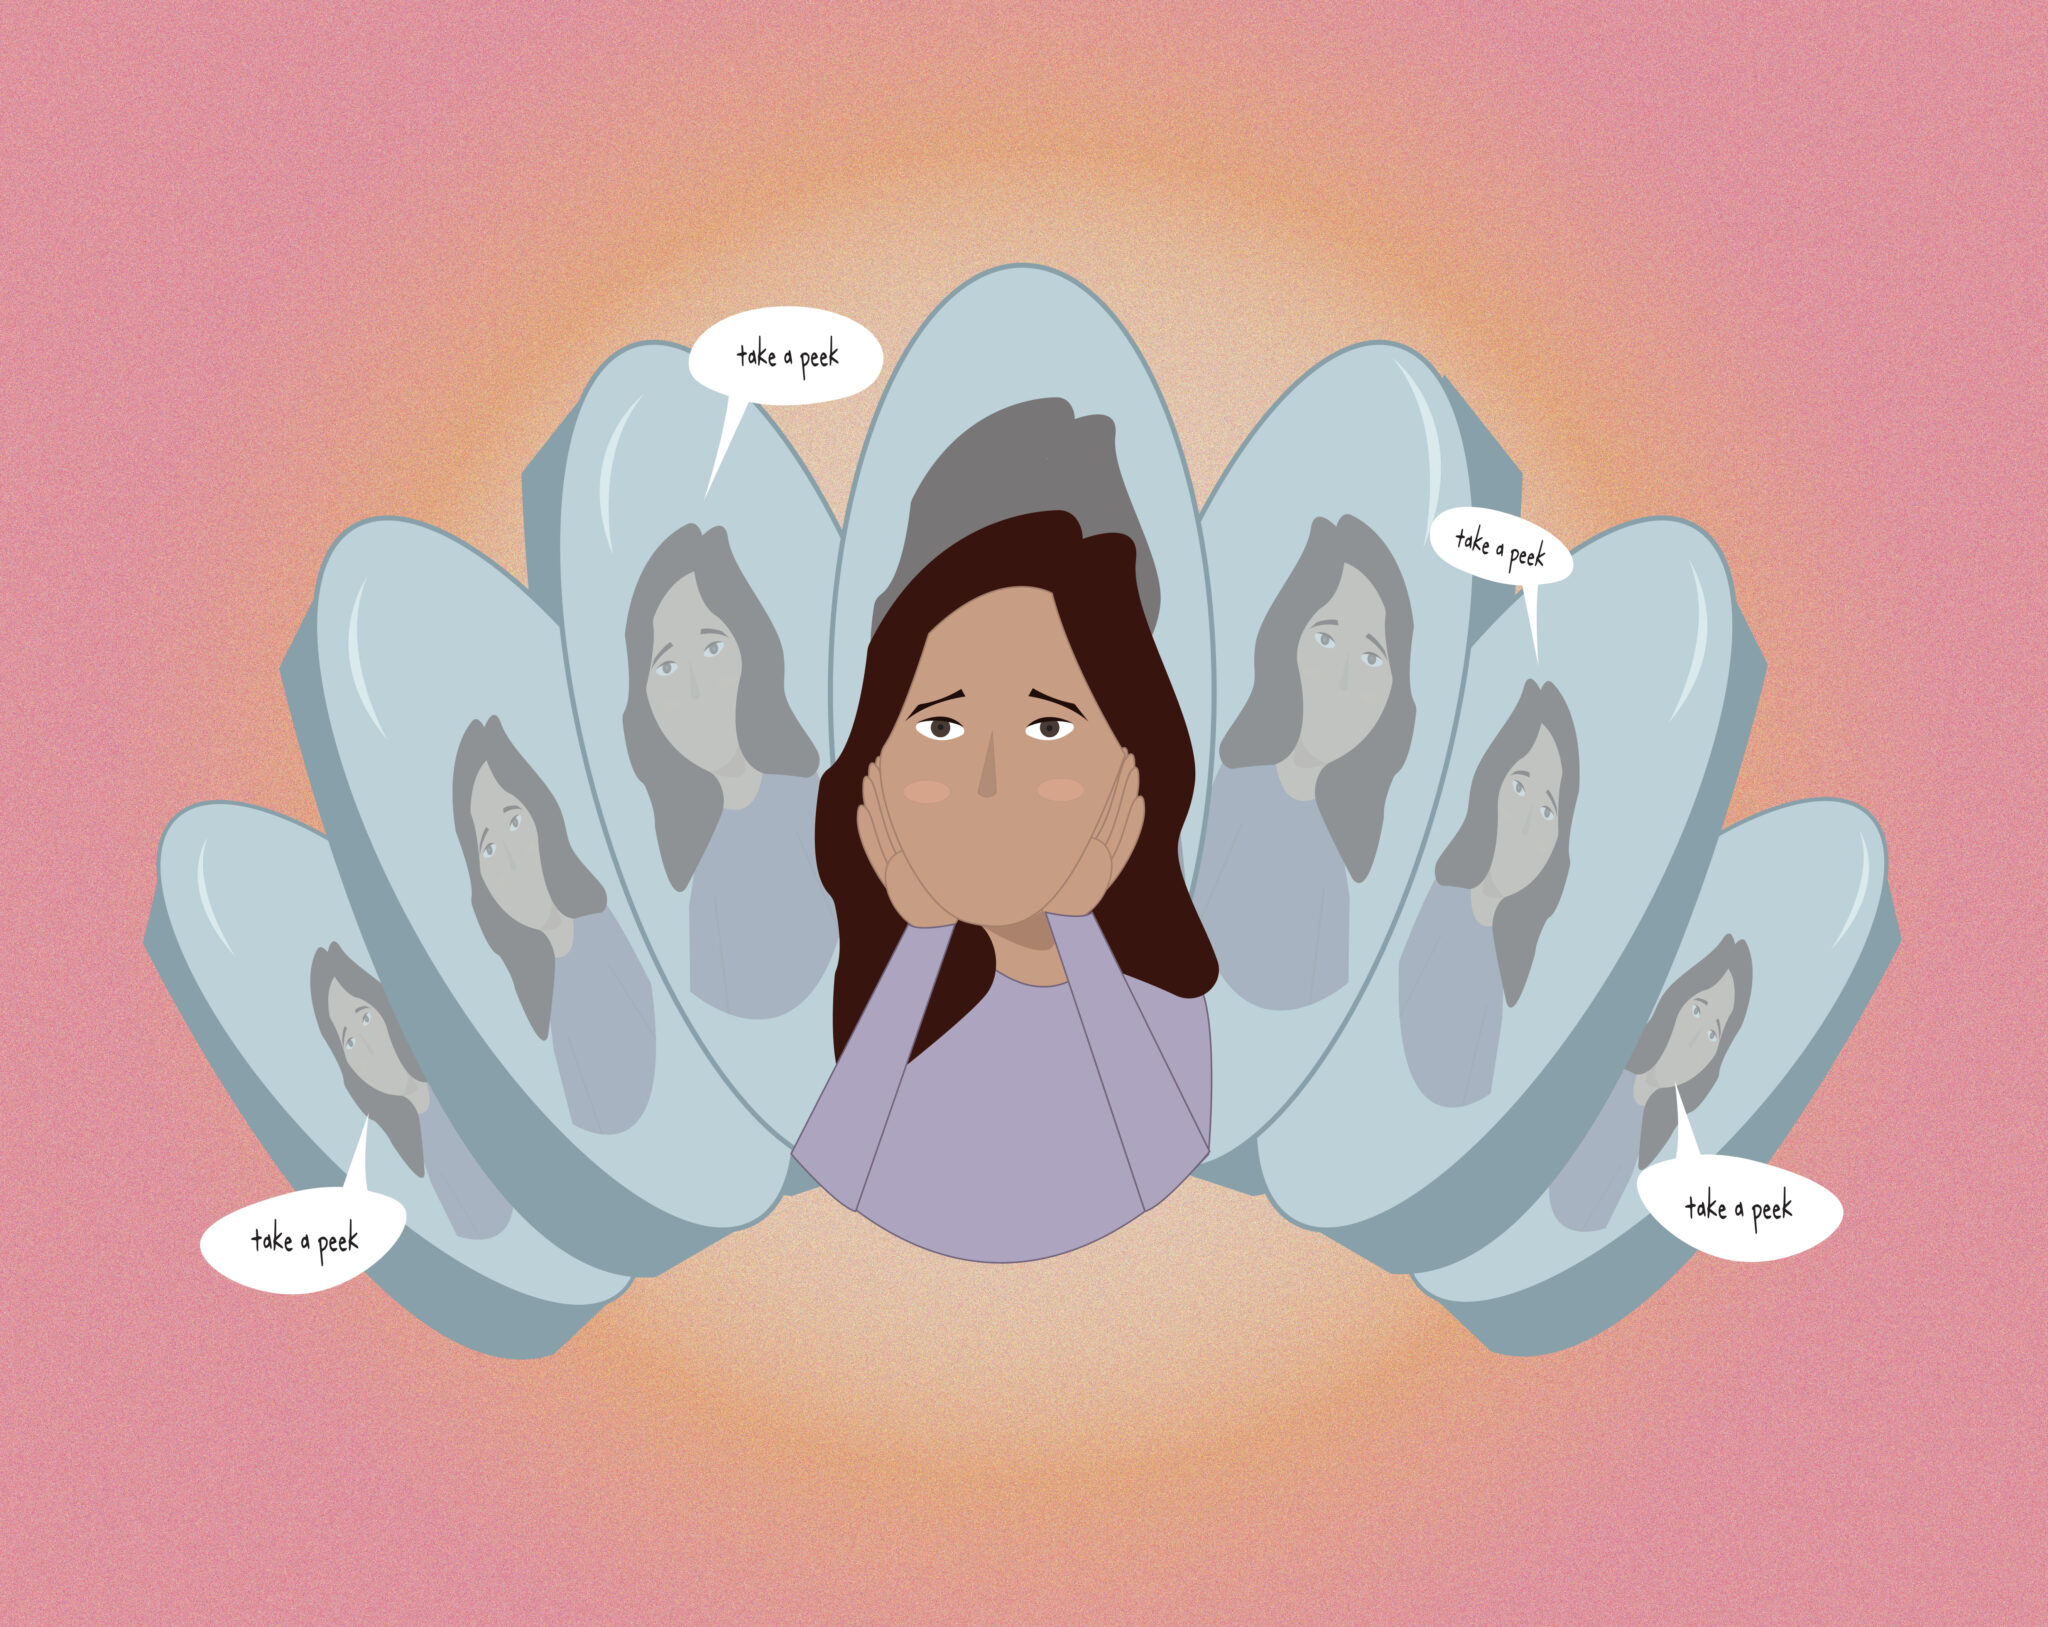 Illustration of a girl surrounded by mirrors and speech bubbles that read “take a peek” as she holds her hands up to her face in a state of distress.